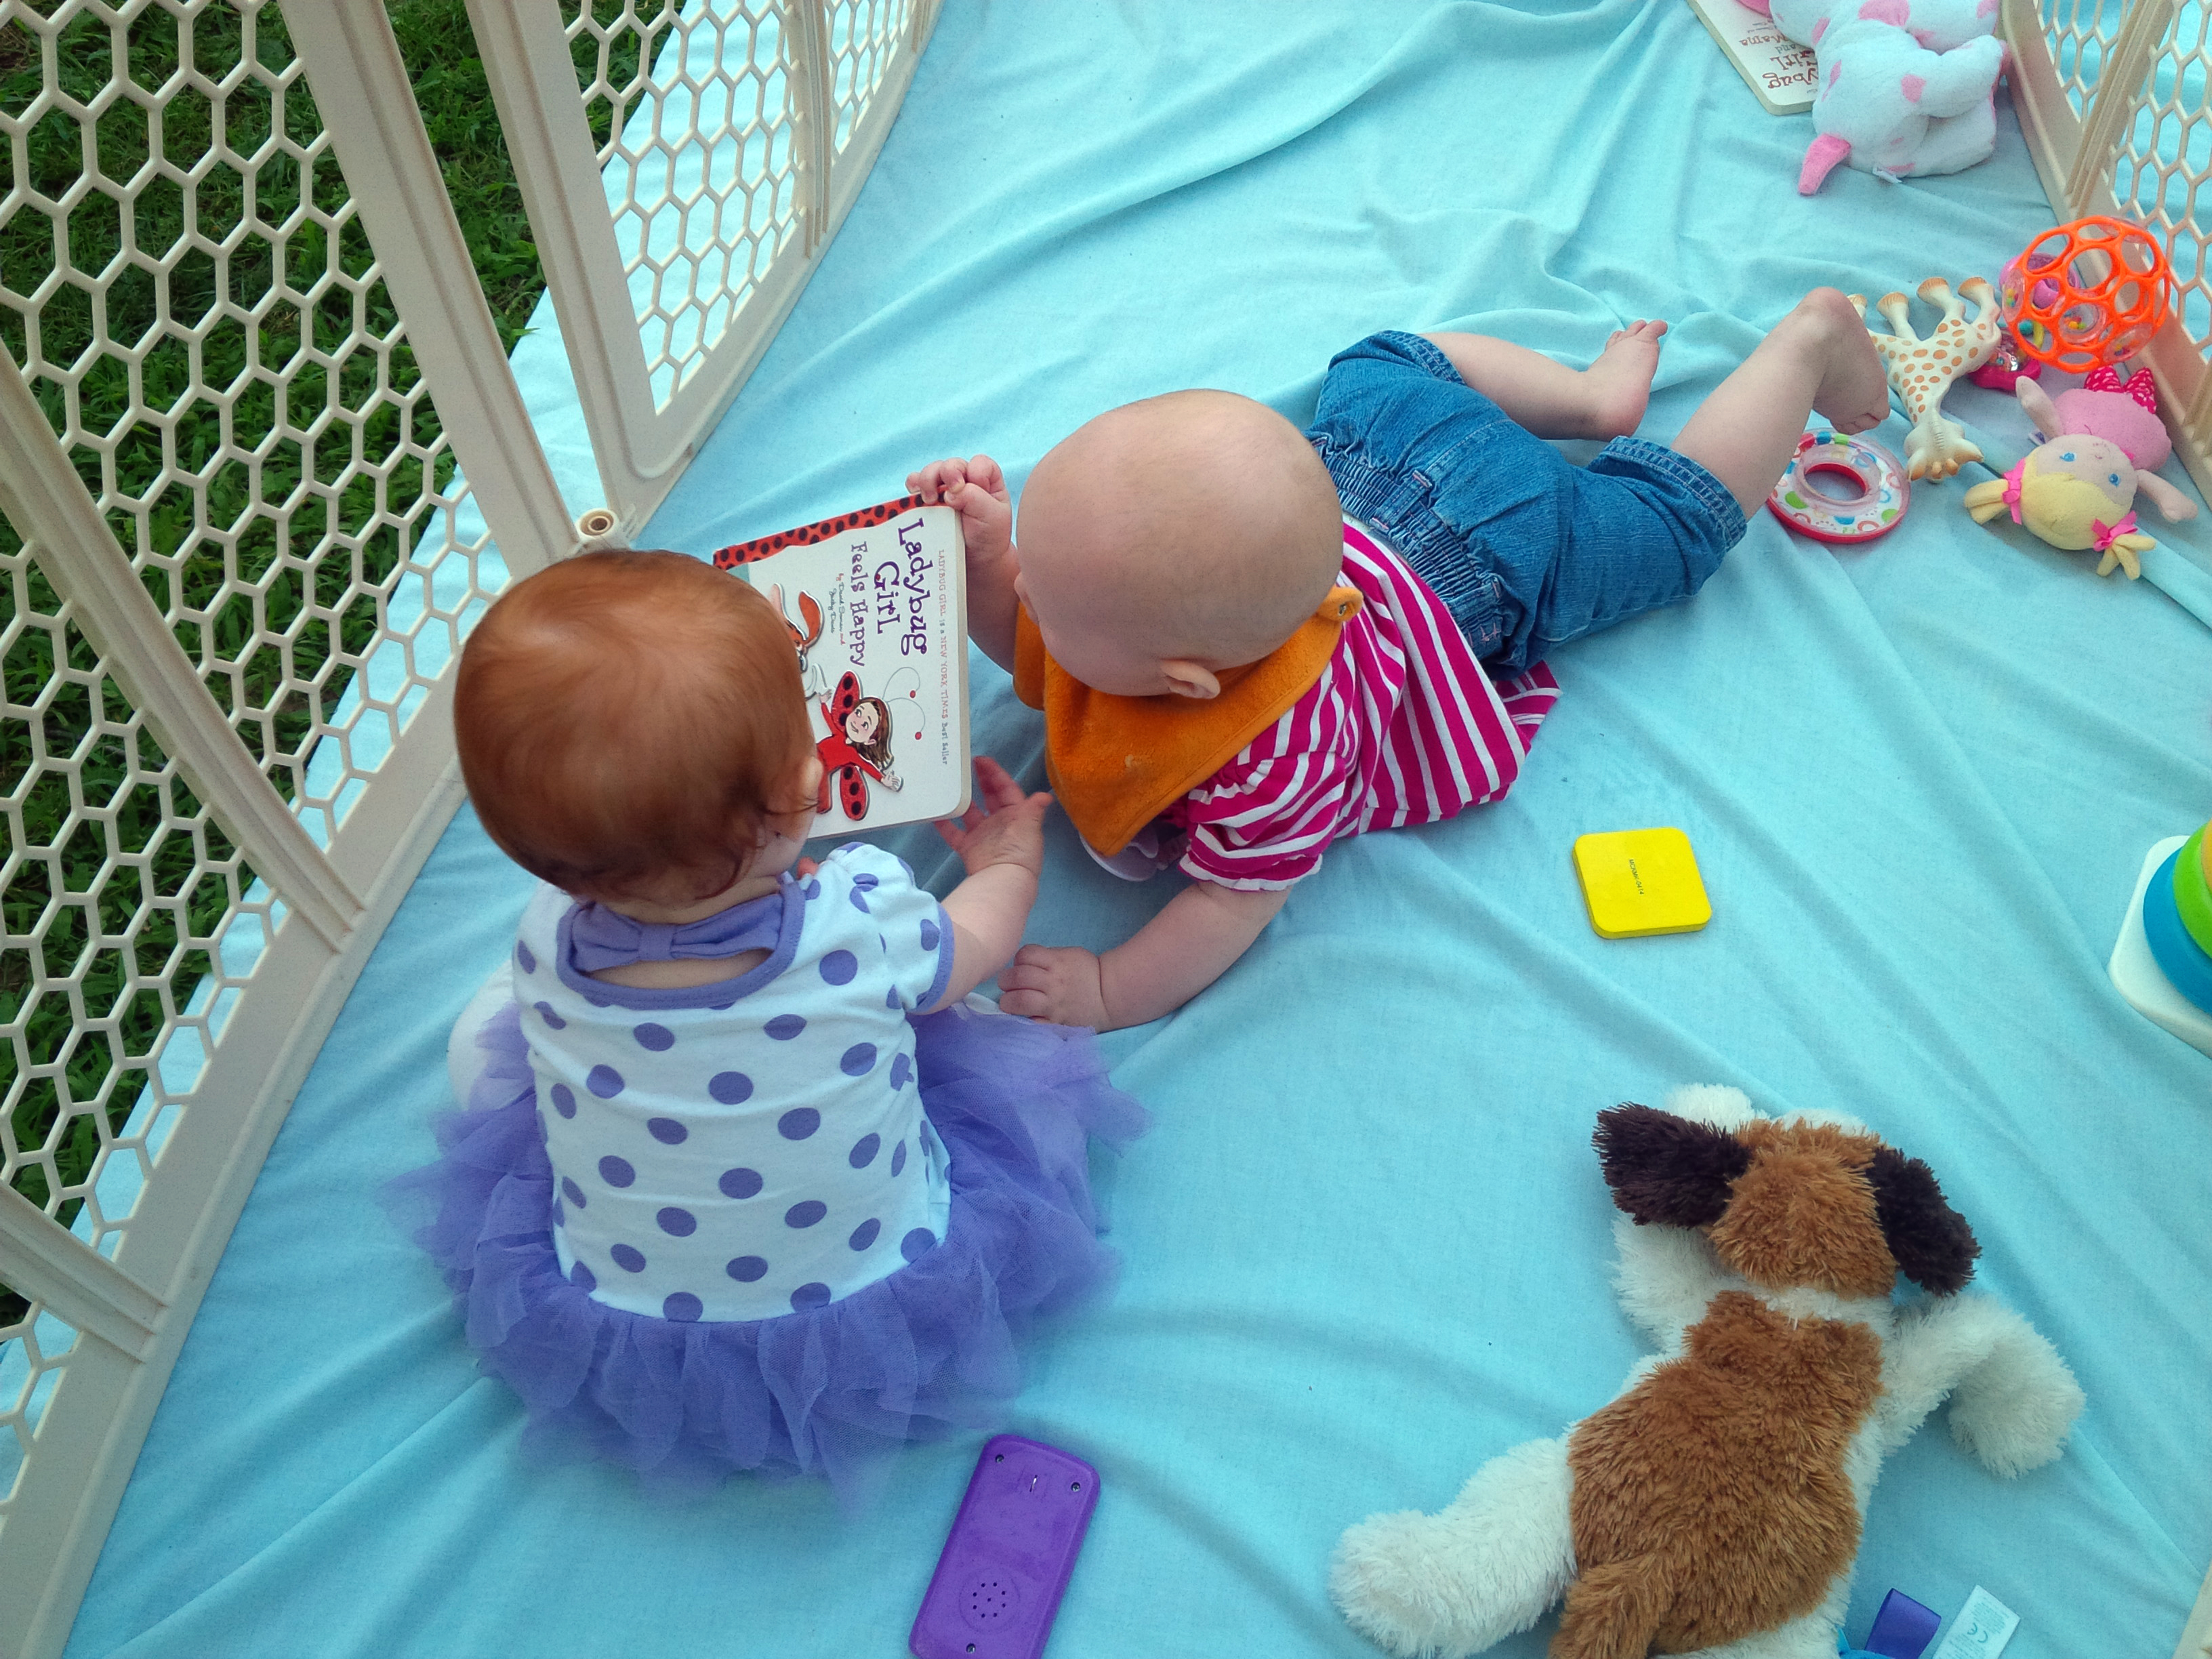 two babies looking at a book, surrounded by toys